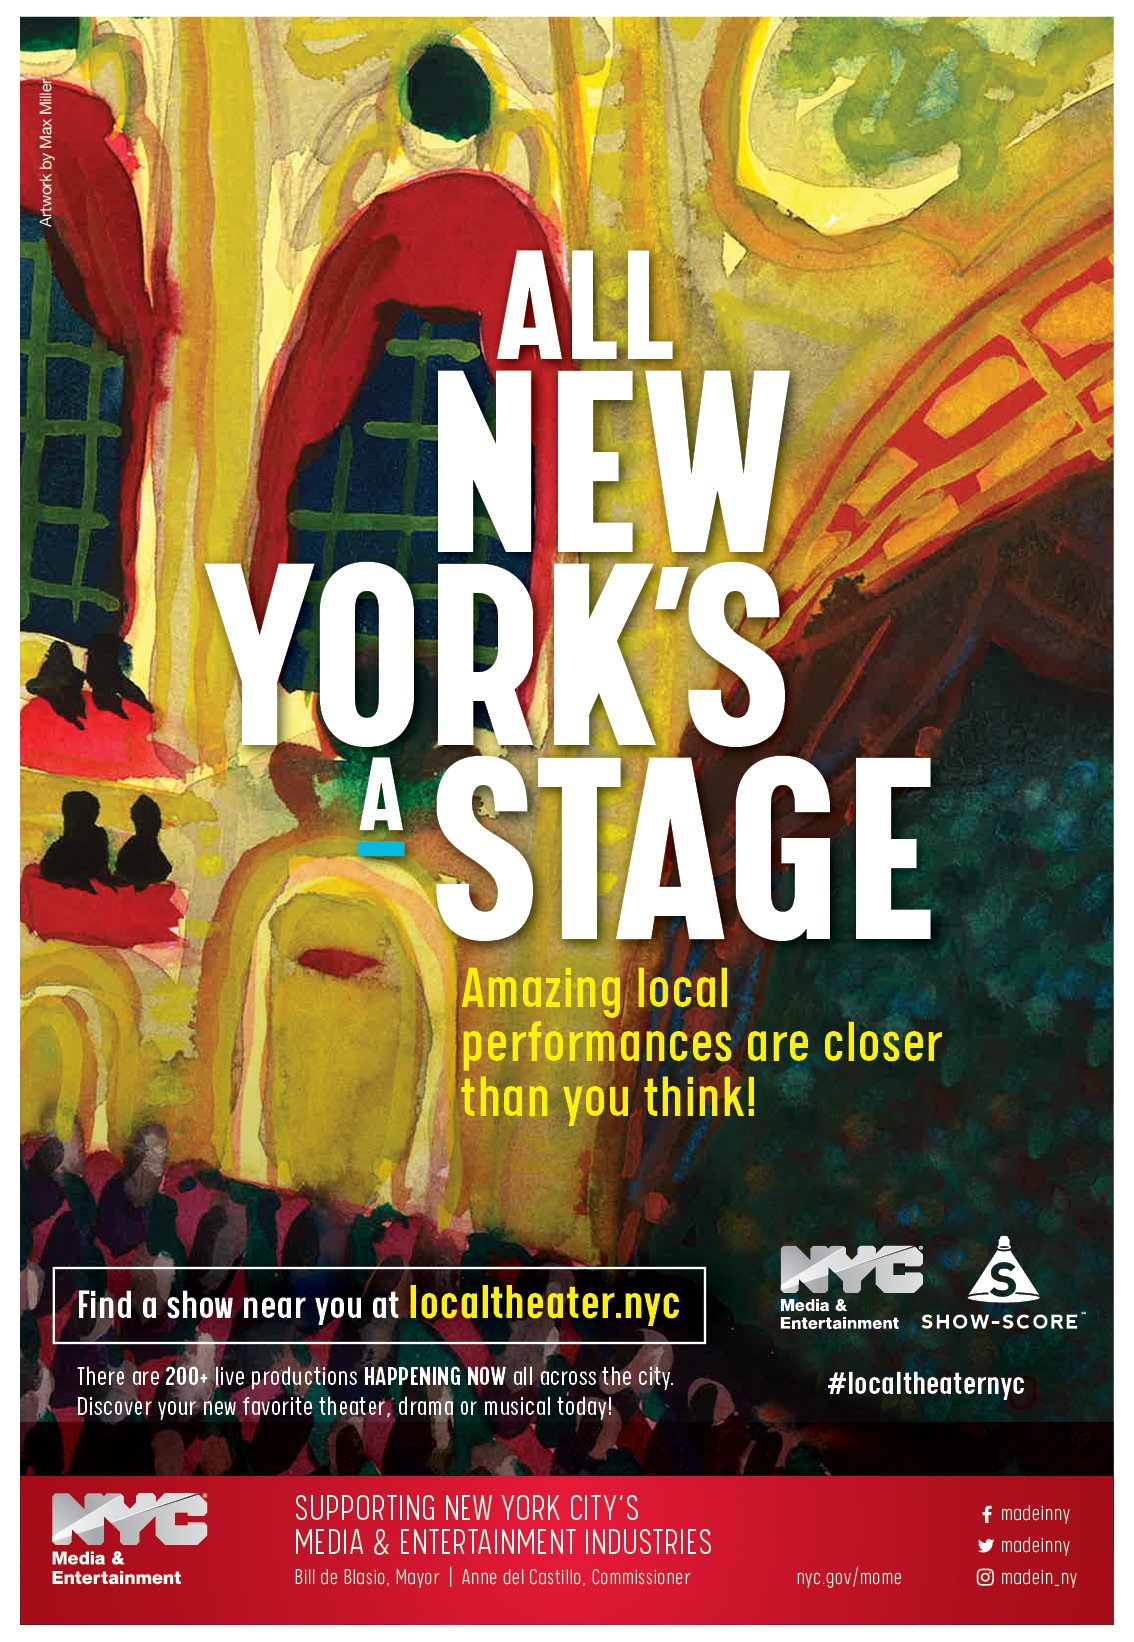 All NY's a Stage